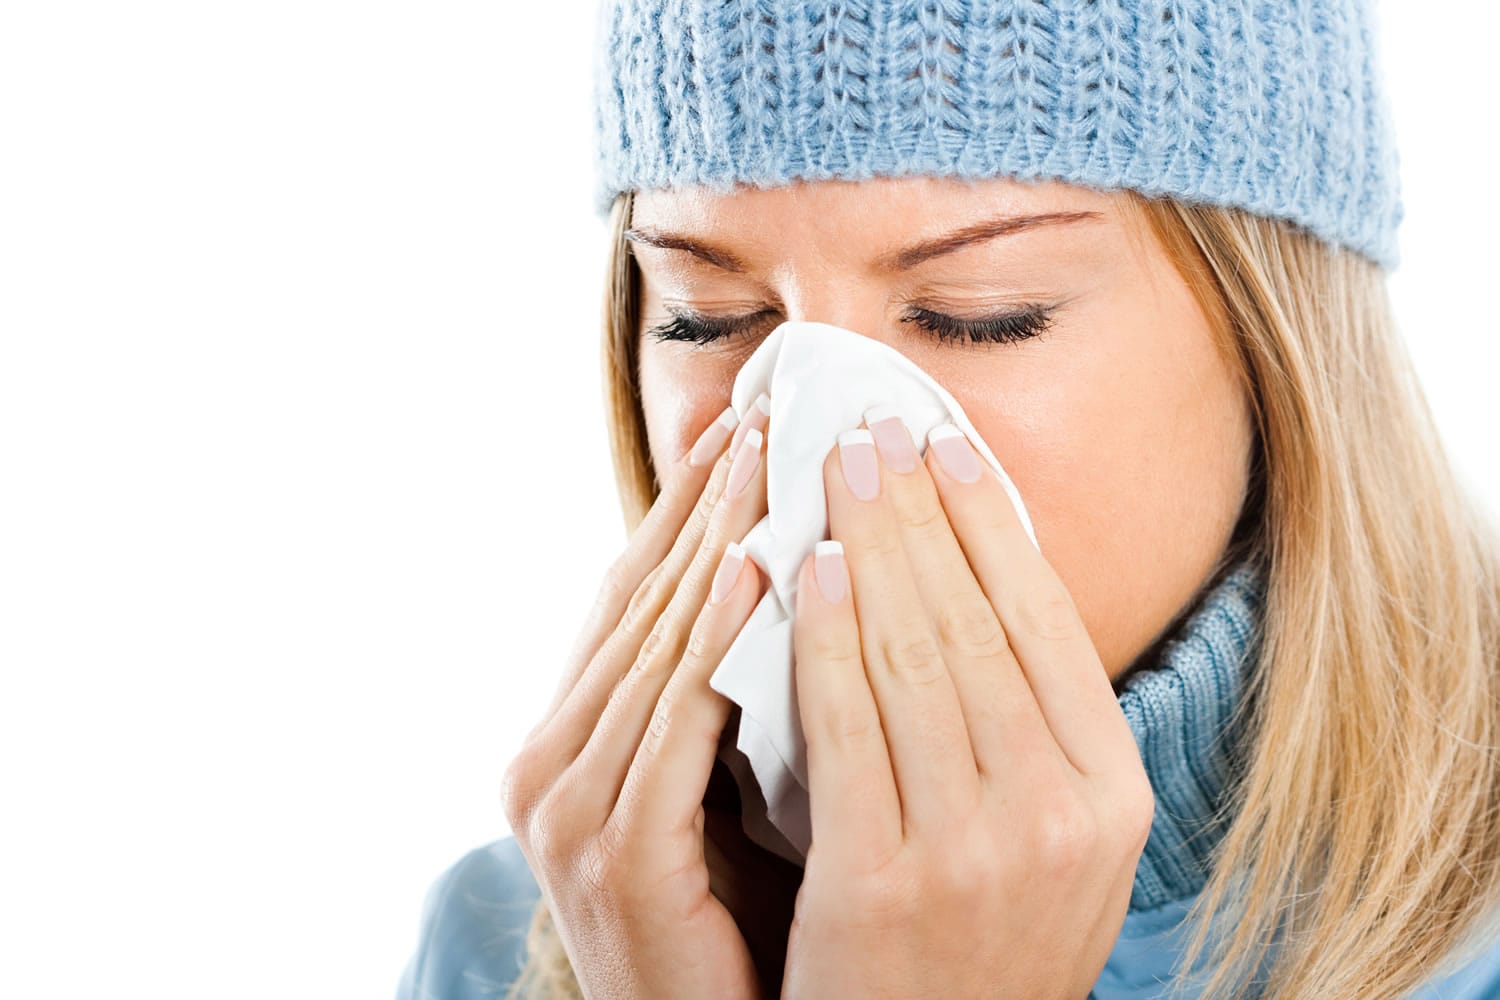 Some winter colds might actually be allergies.